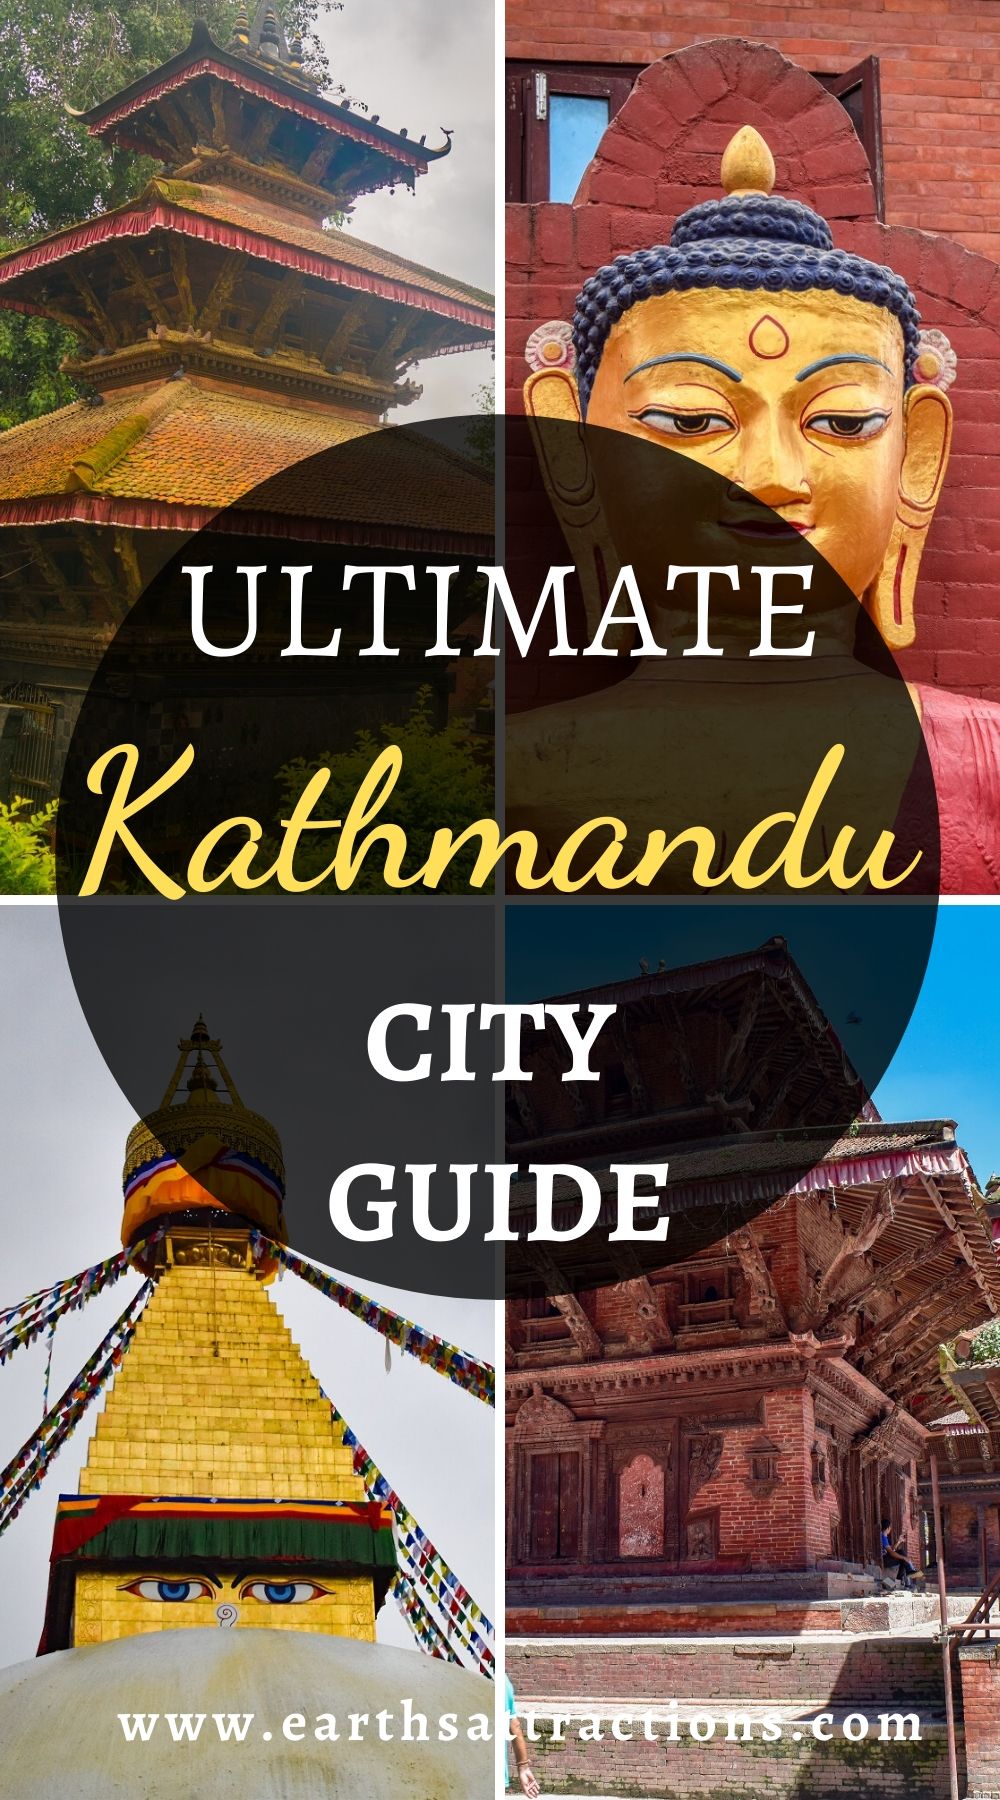 The ultimate Kathmandu city guide by an insider. This travel guide to Kathmandu Nepal includes the best things to do in Kathmandu, the top restaurants in Kathmandu, and practical travel tips for Kathmandu. Off the beaten path things to do in Kathmandu are also included along with the popular tourist attractions in Kathmandu. Plan your trip to Kathmandu or use this Kathmandu guide to create your Kathmandu bucket list! #kathmandu #kathmanduguide #nepal #travelguide 